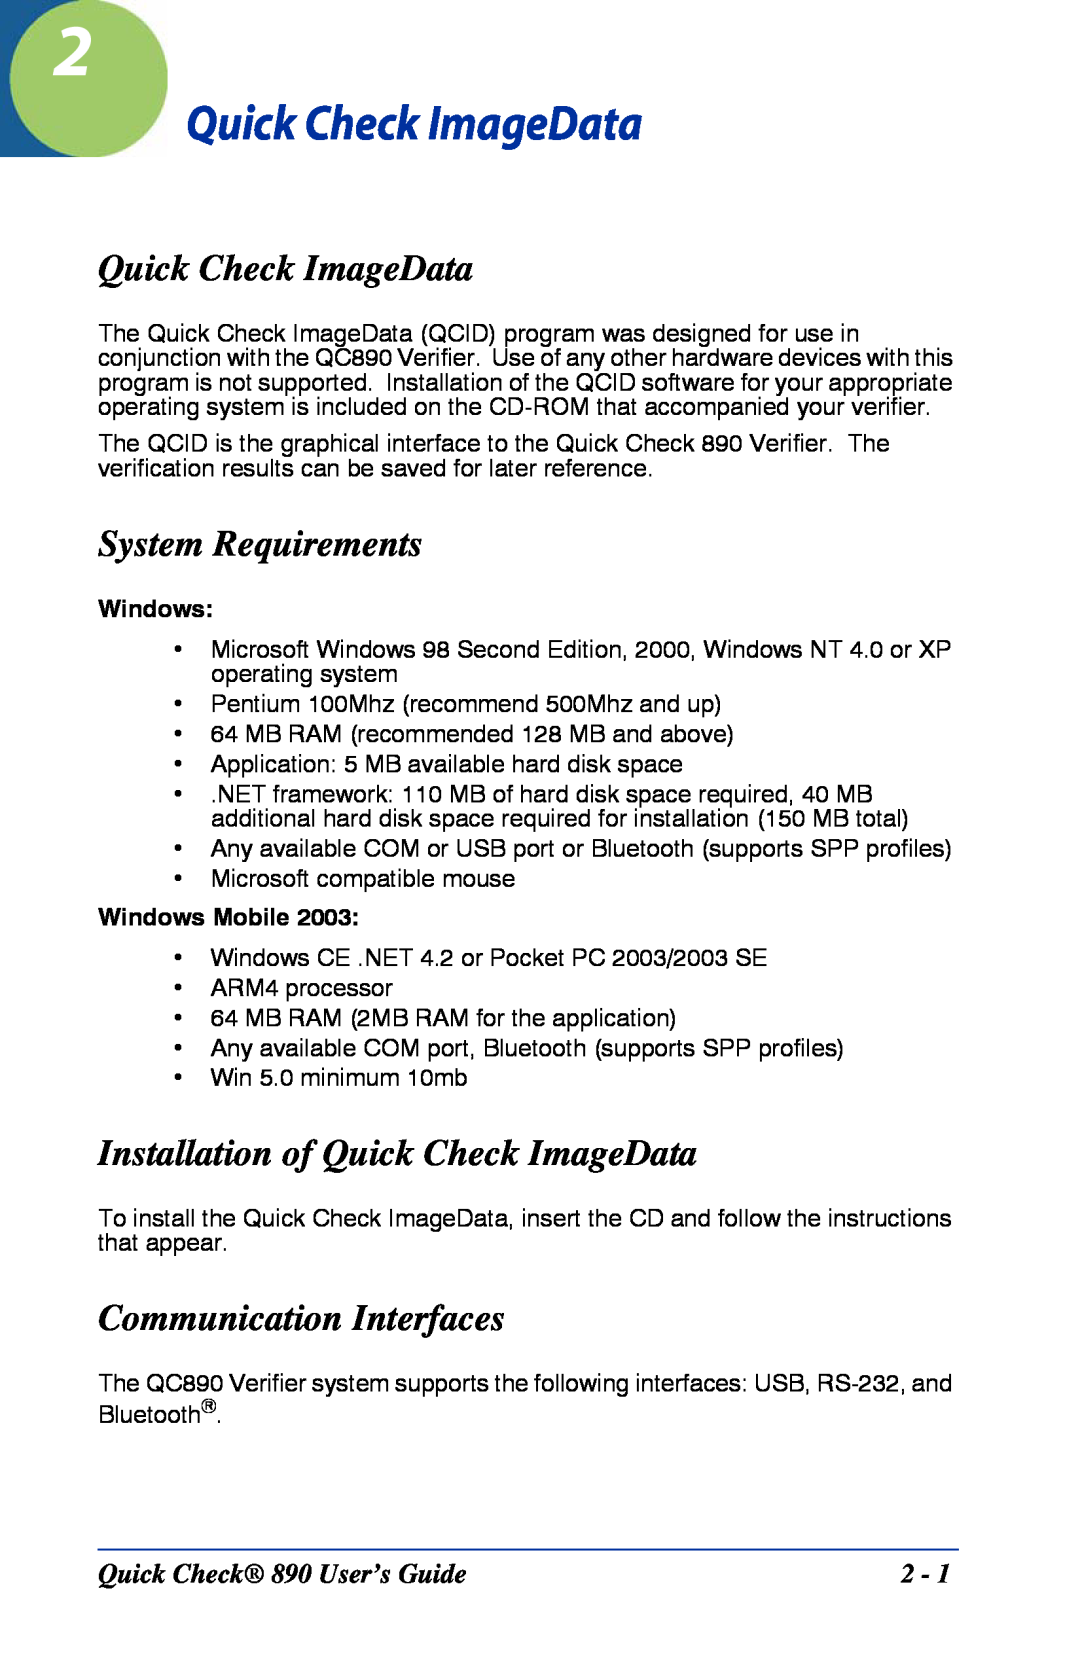 HandHeld Entertainment Quick Check 890 manual System Requirements, Installation of Quick Check ImageData, Windows 